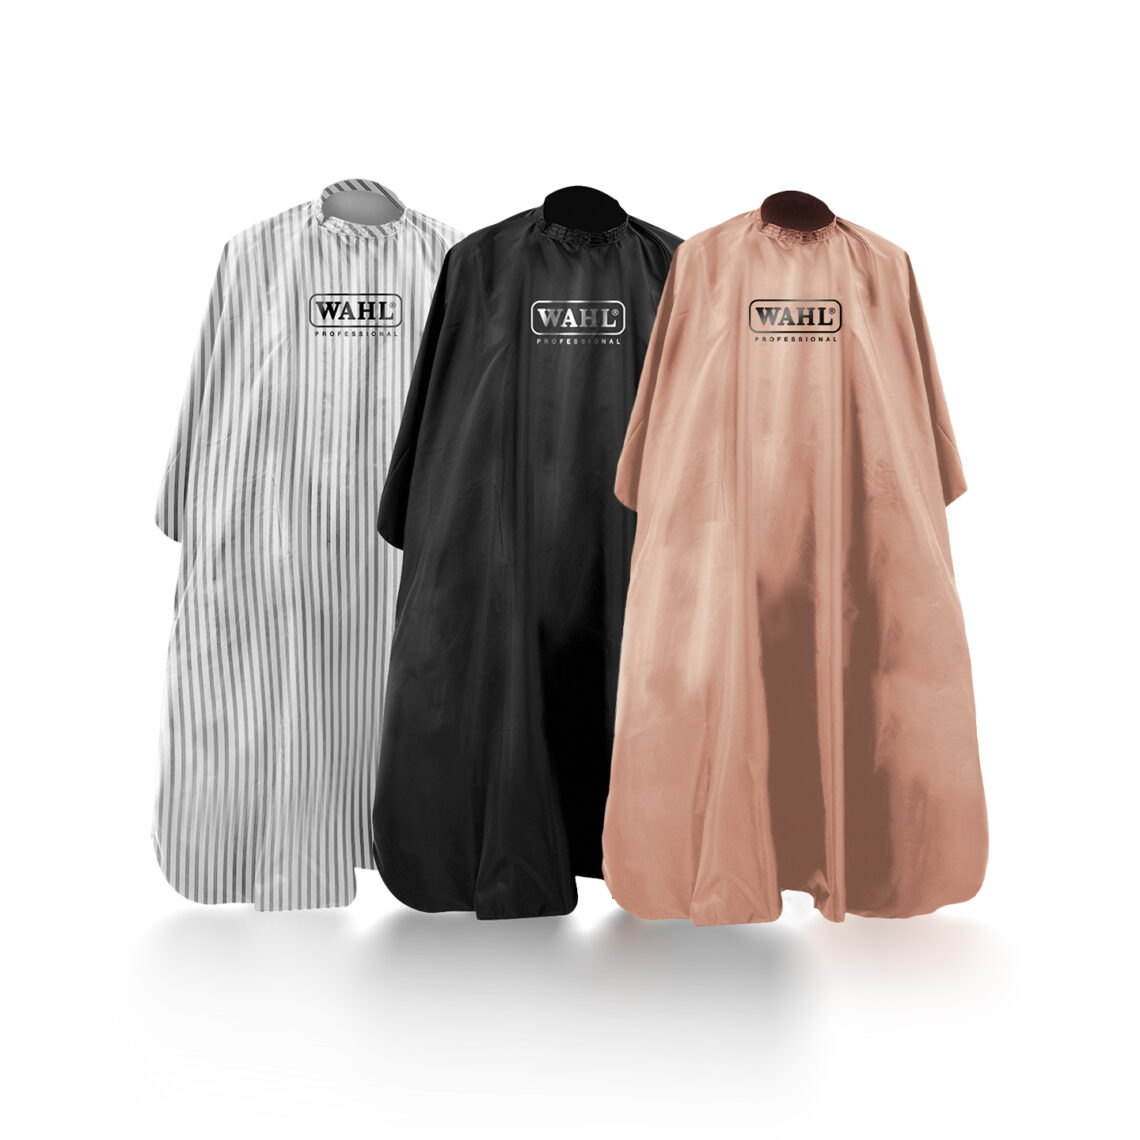 Wahl Hairdressers Capes Gowns | Hair Salon & Barbers Equipment